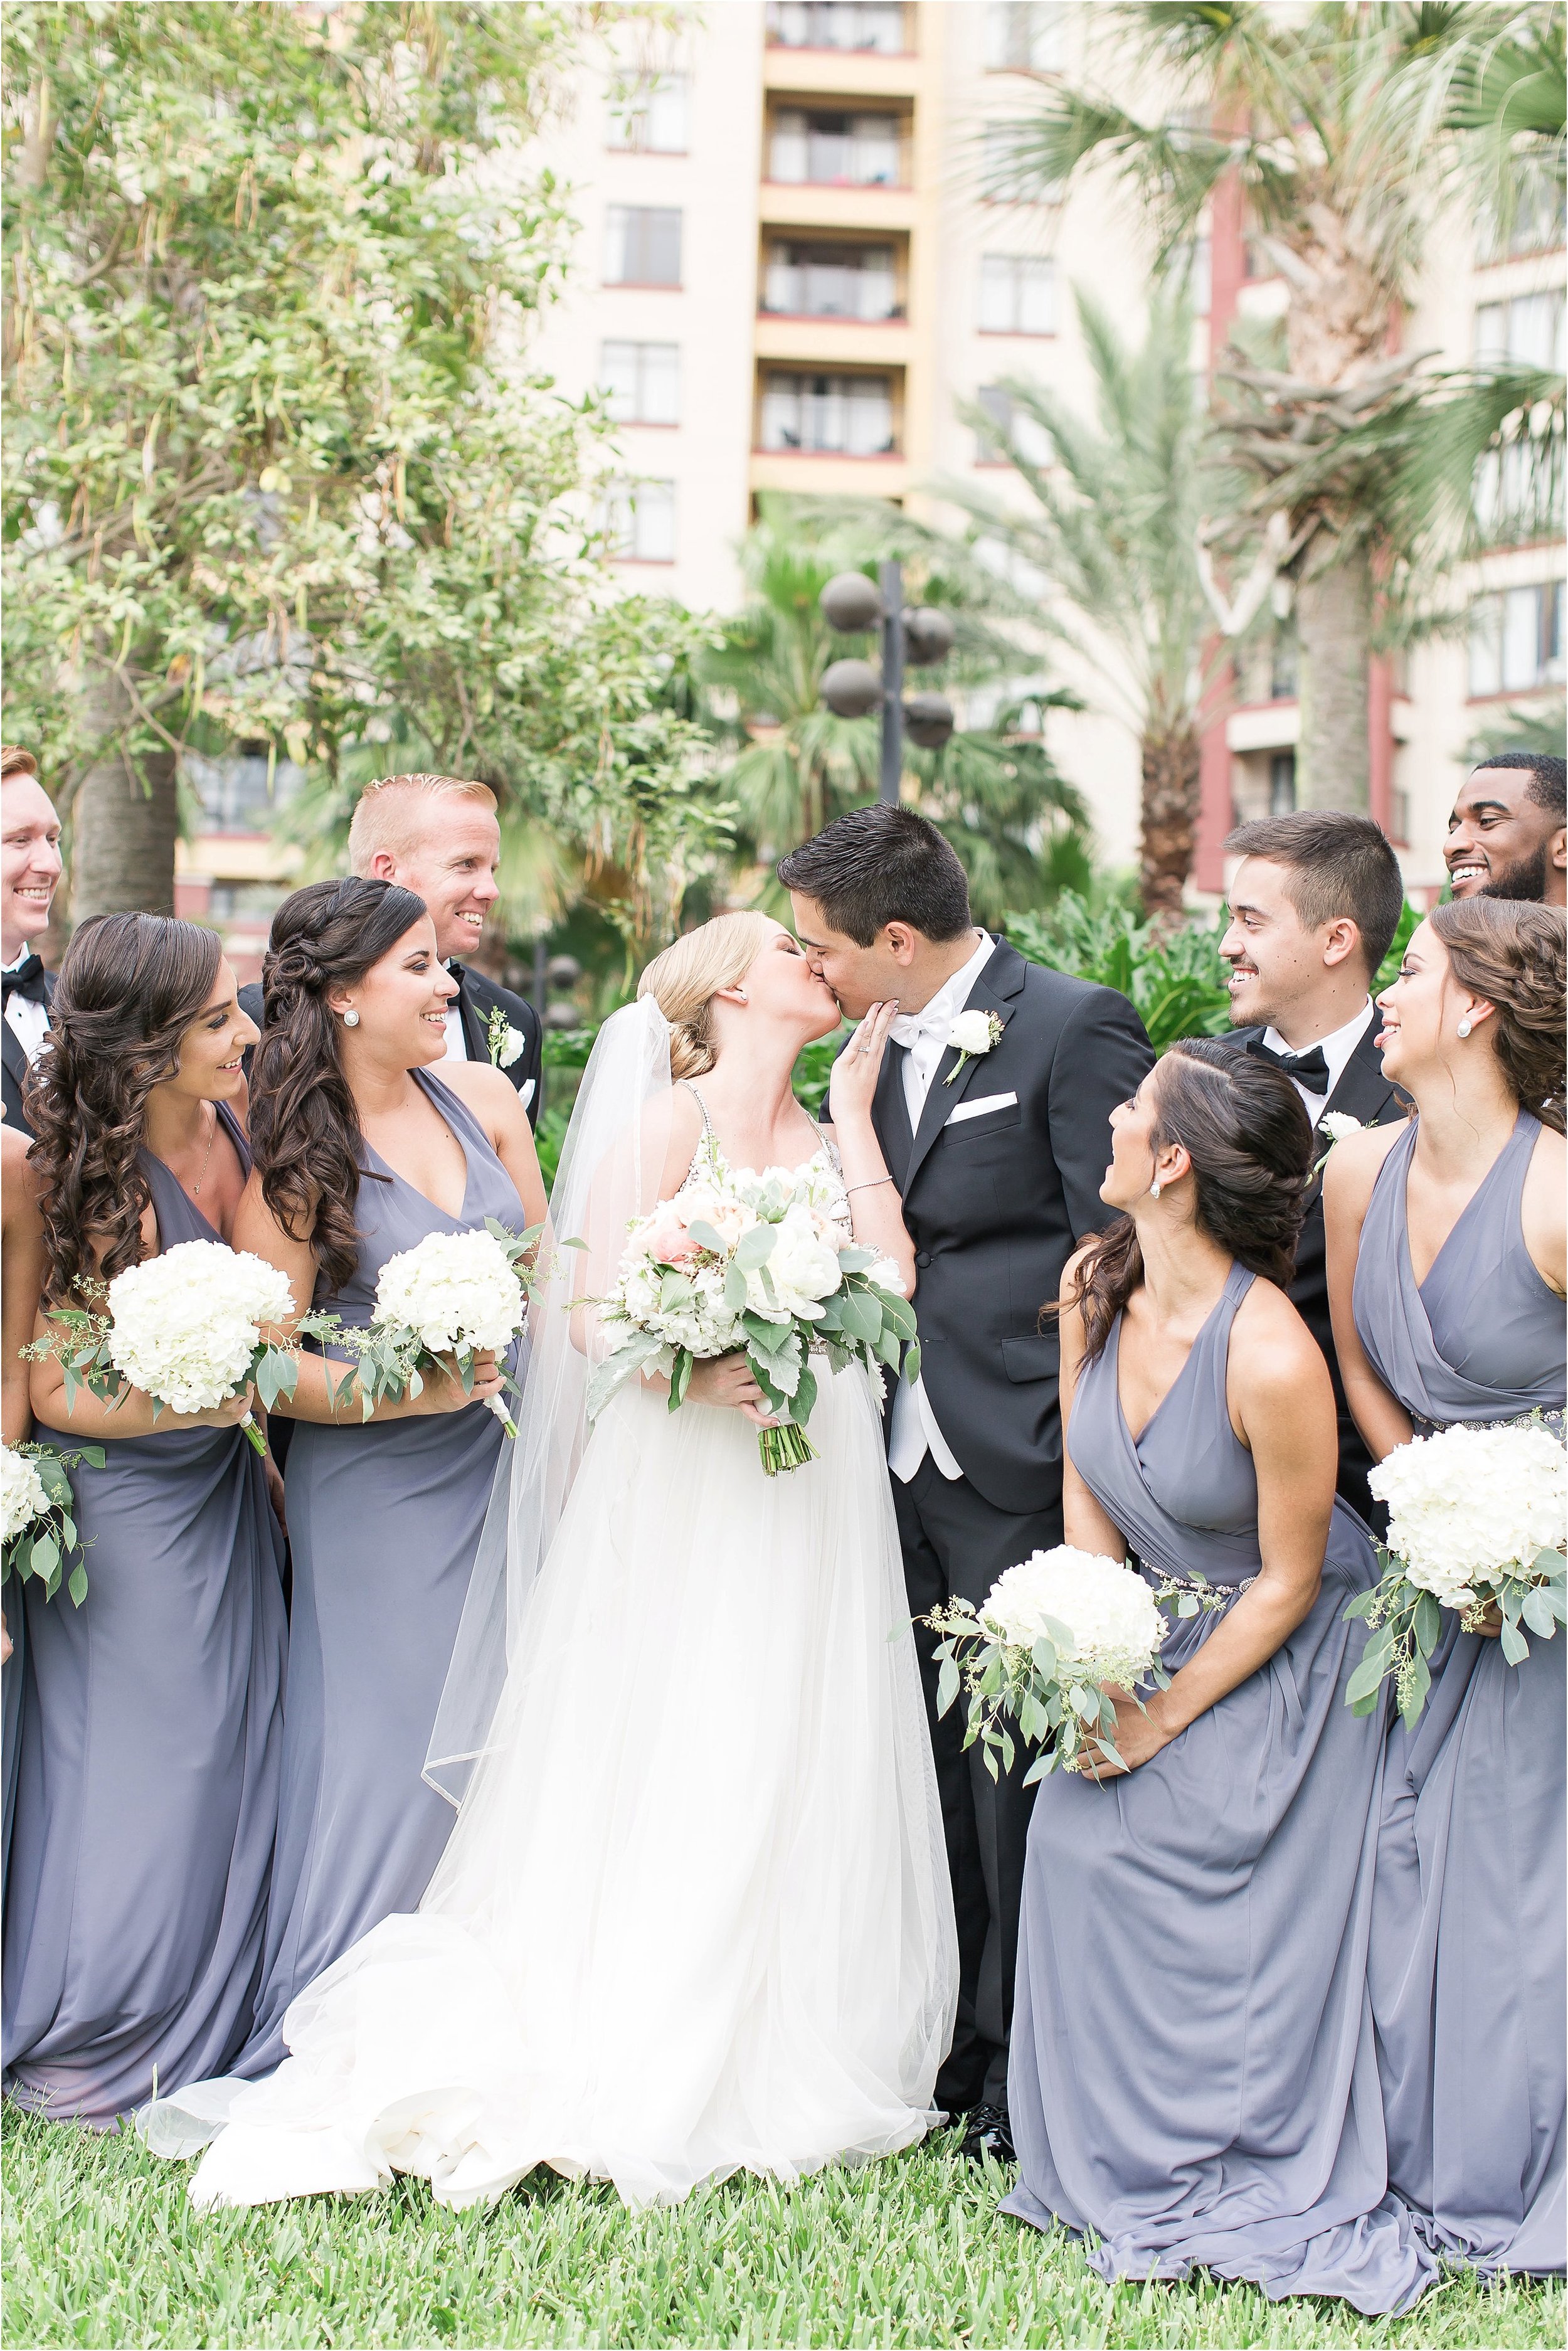 Grey white and black bridal party at Wyndham Grand at Bonnet Creek wedding by PSJ Photography 